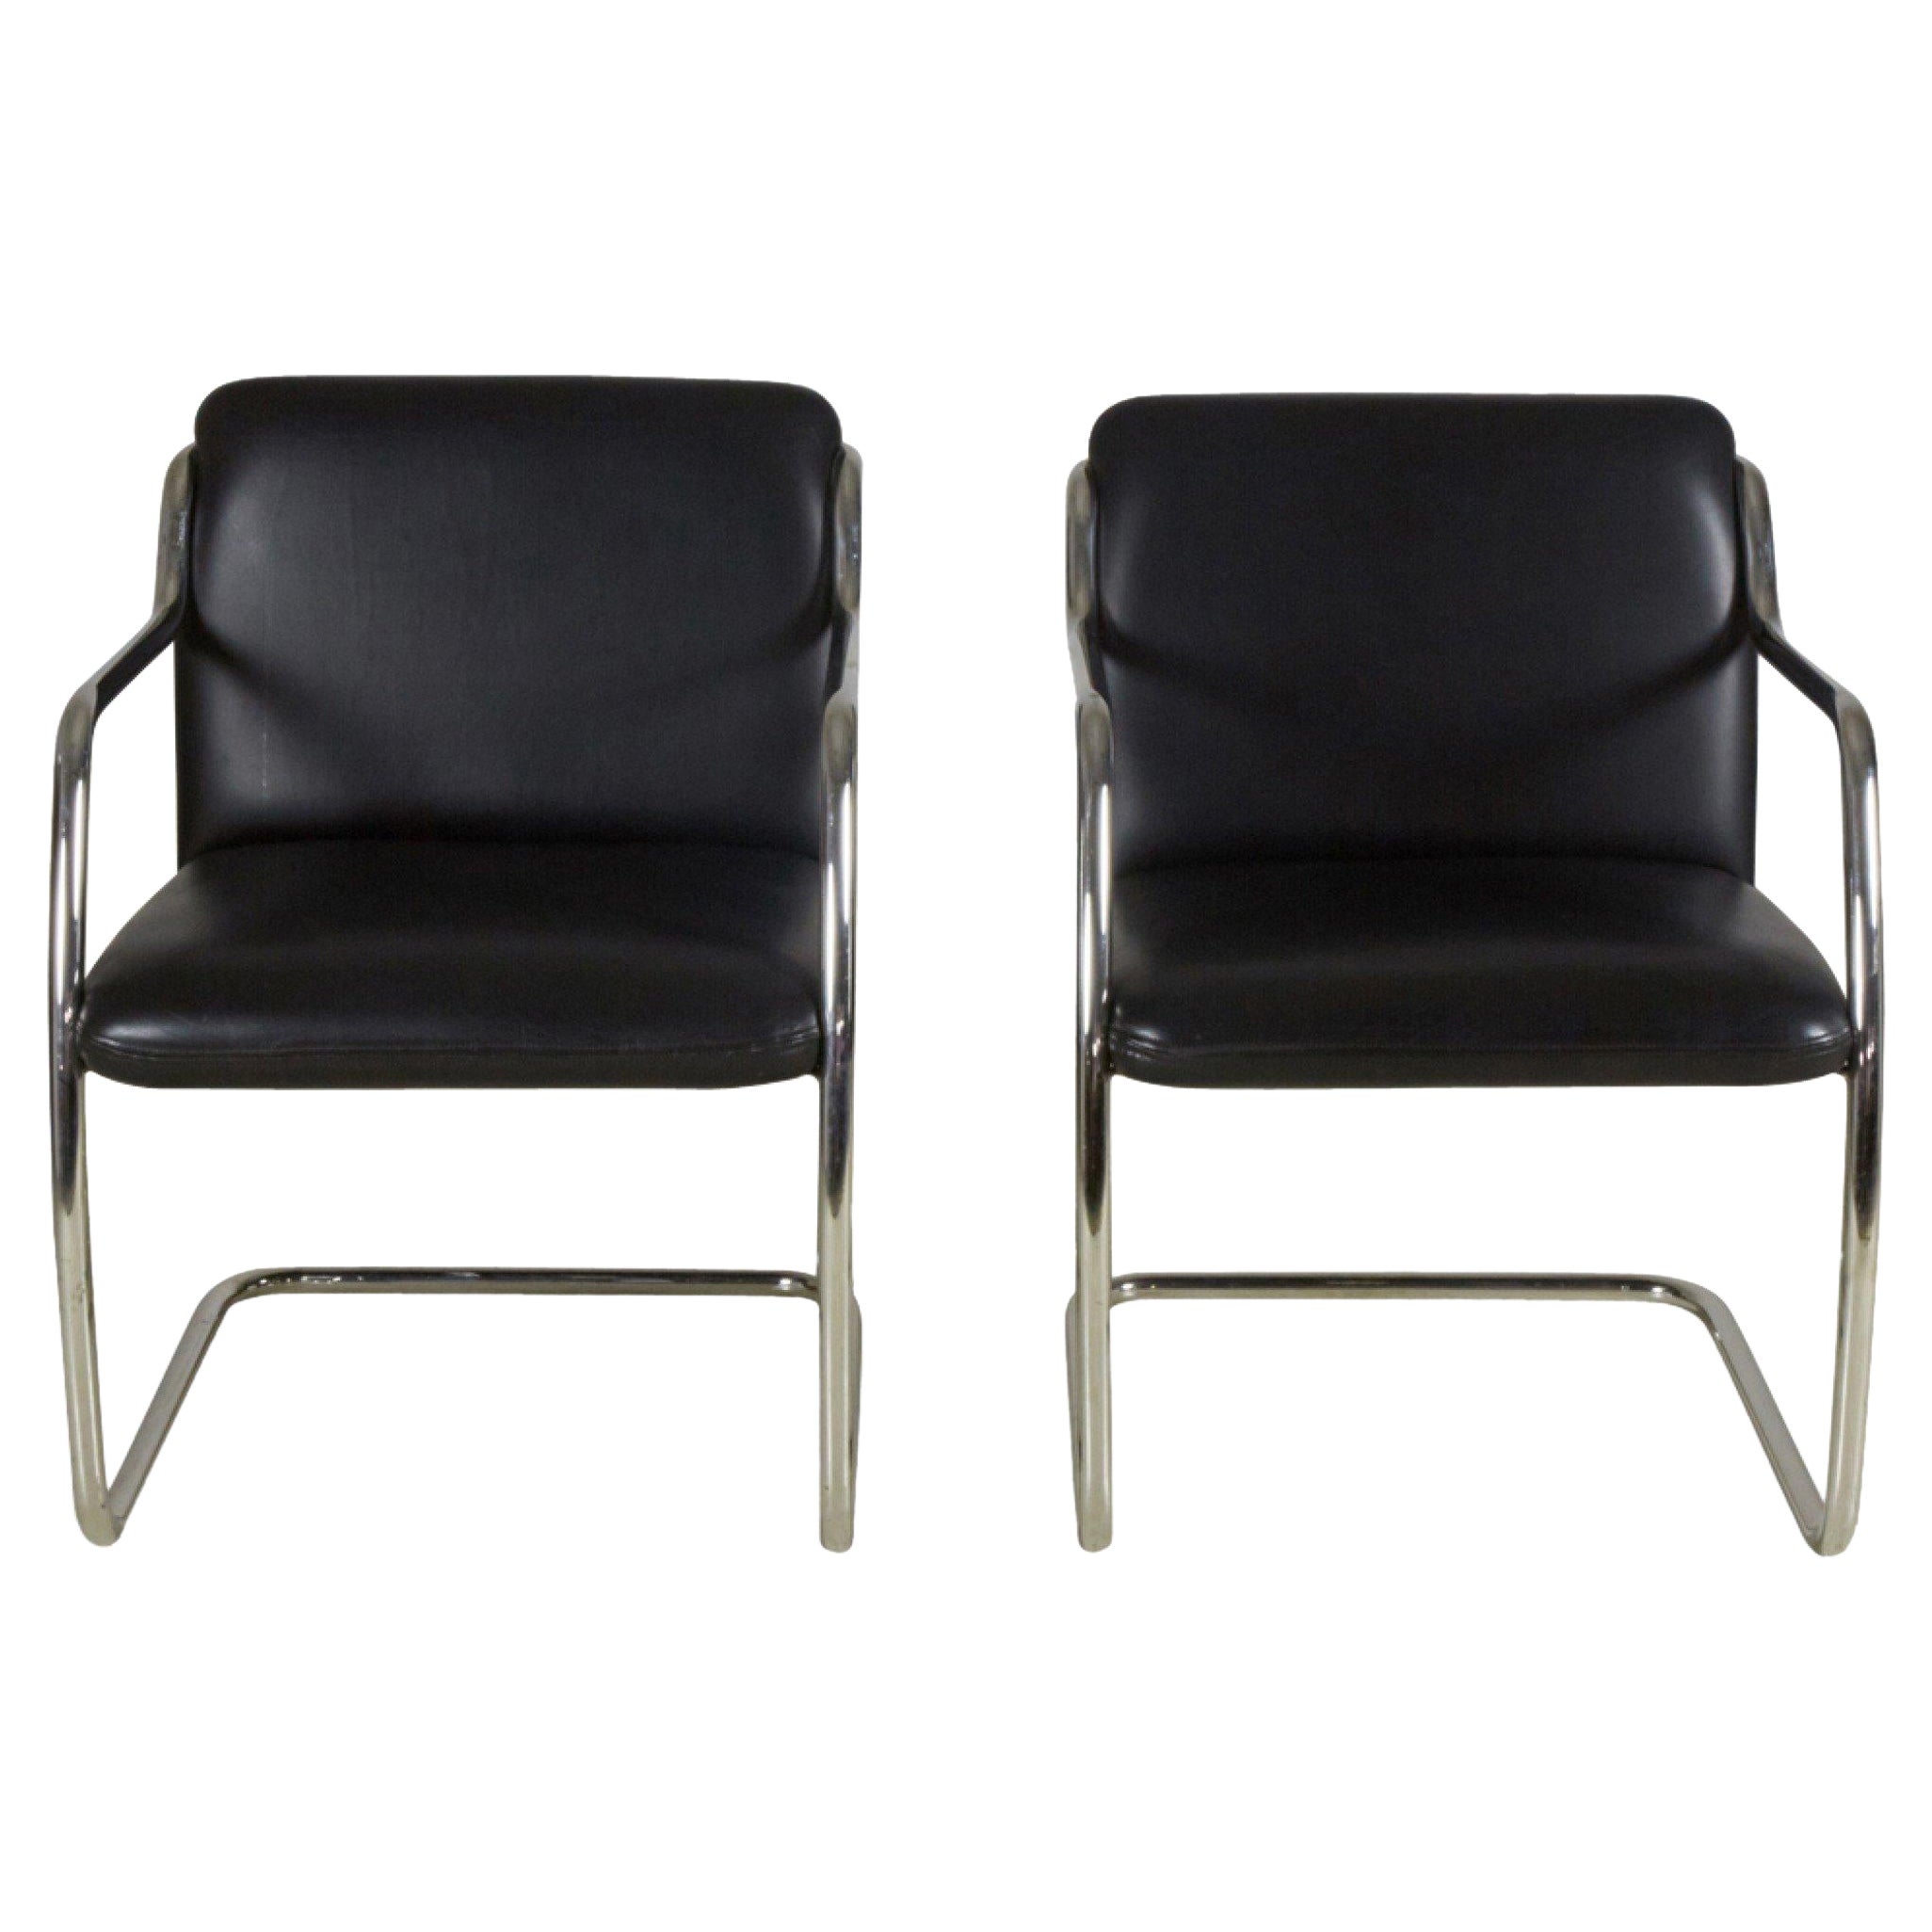 Pair of Brueton Contemporary Black Leather and Steel Tube Frame Armchairs For Sale